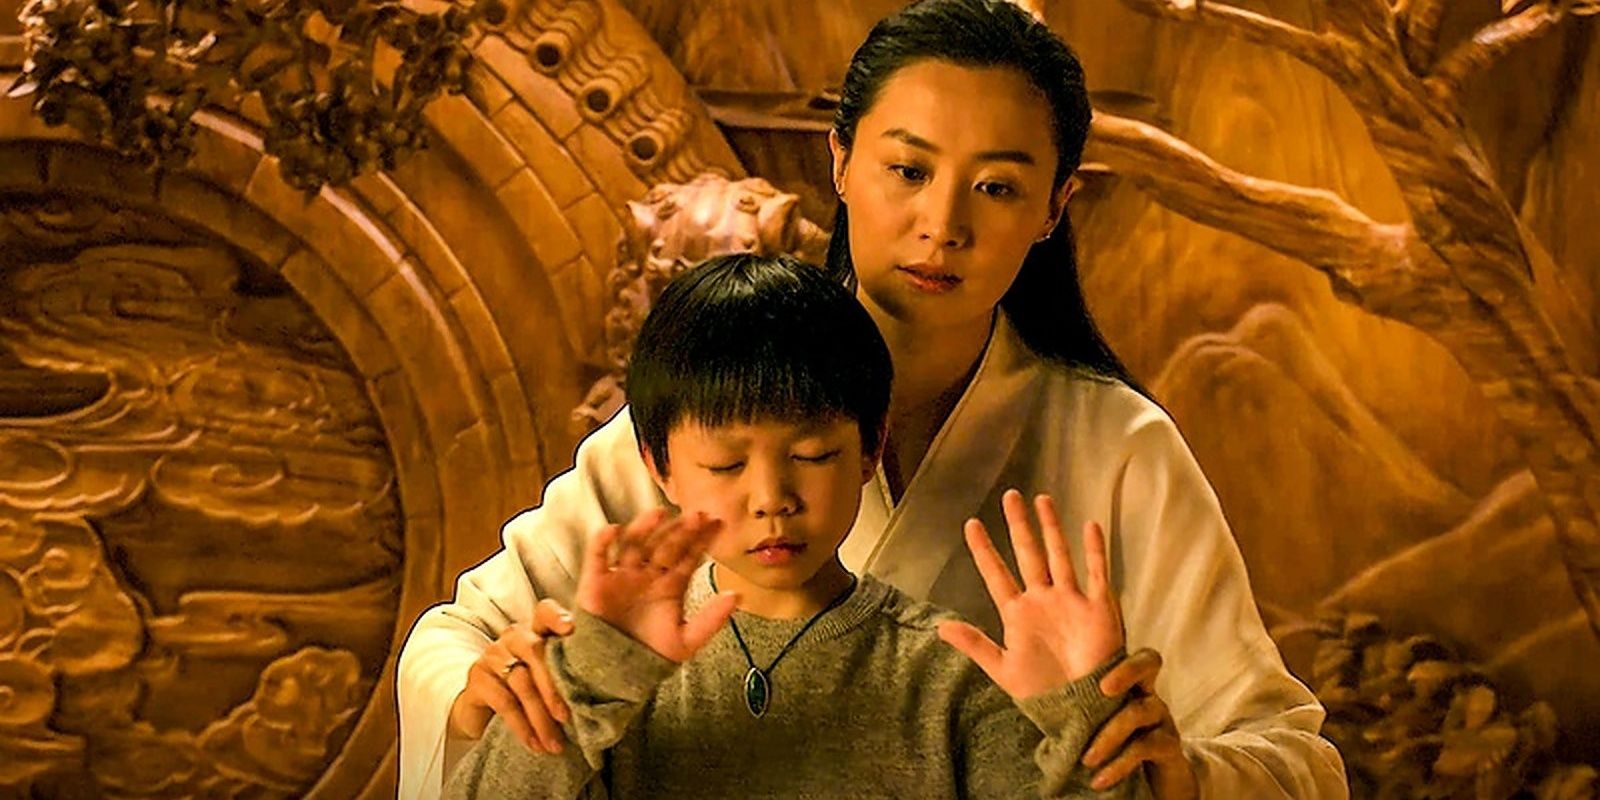 shang-chis-mother-trains-him-as-a-childv1-cropped-7269335